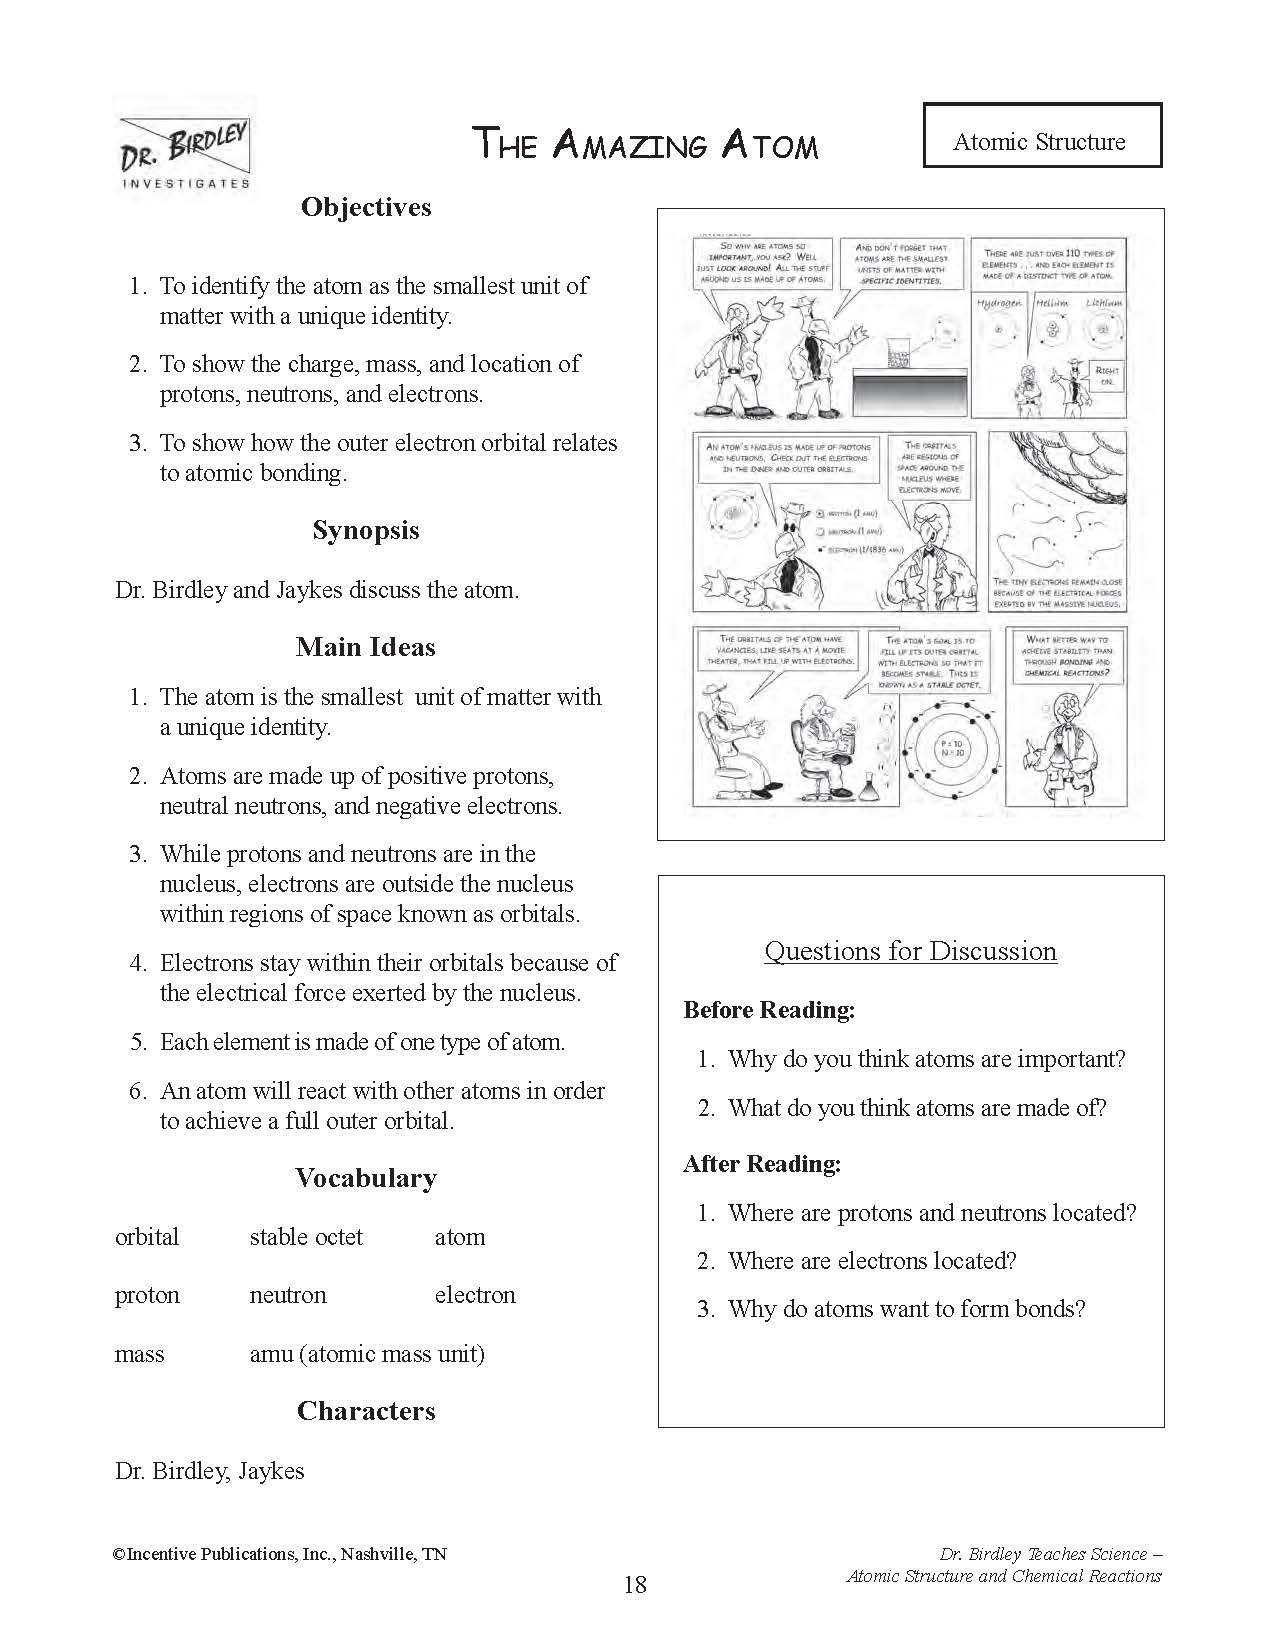 Science World Worksheet Answers Dr Birdley Teaches Science atomic Structure and Chemical